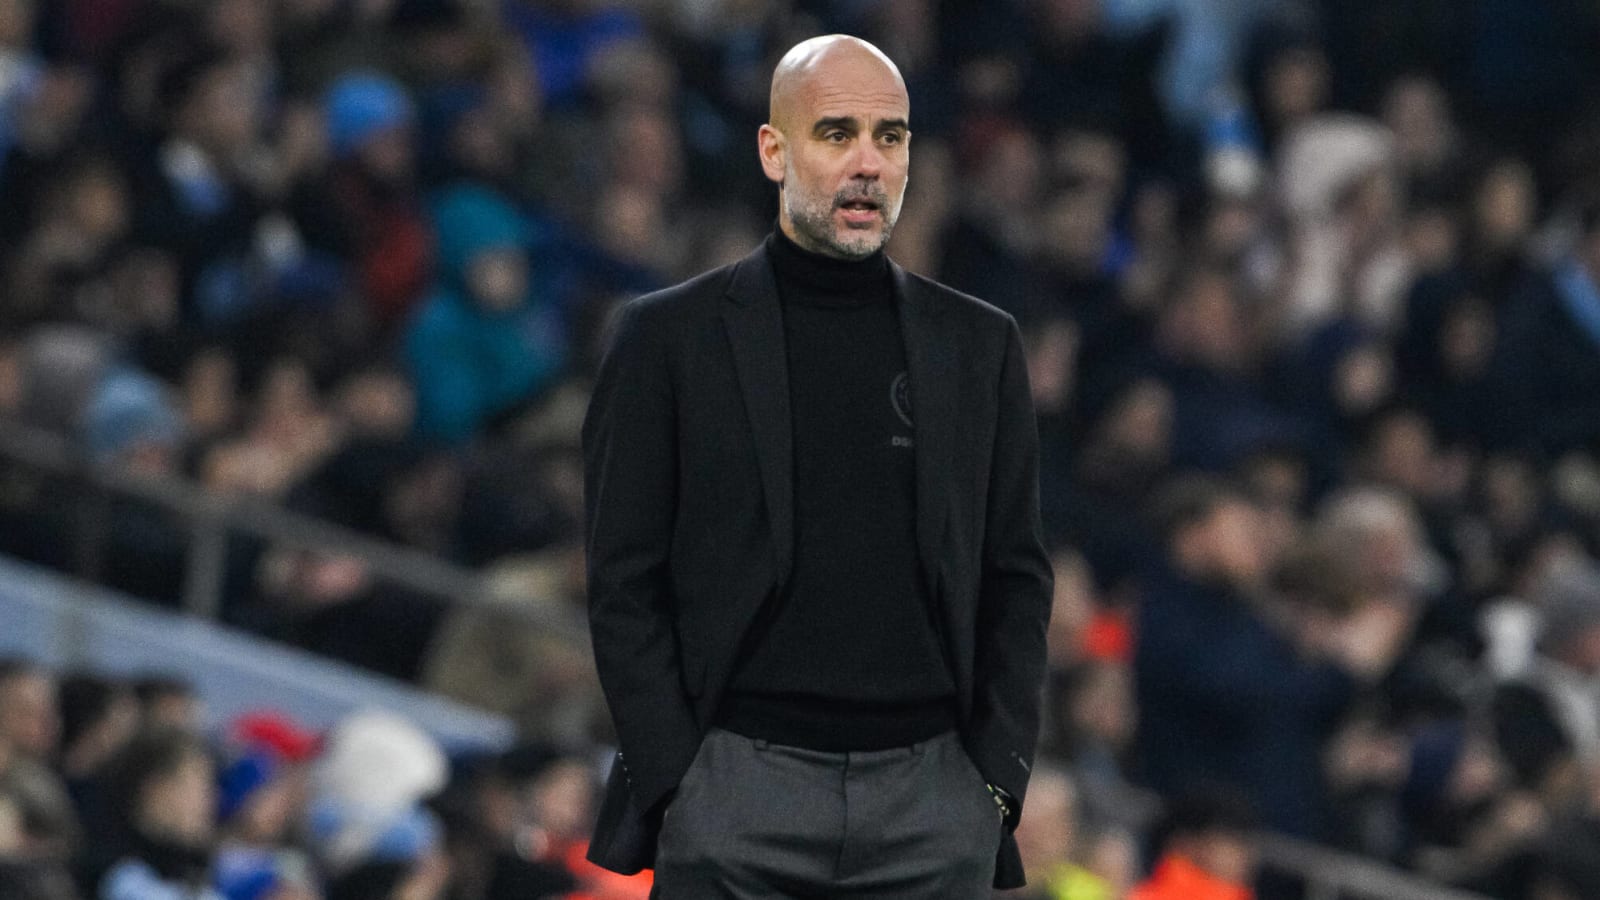 Pep Guardiola appears to have his team in prime form ahead of Anfield trip